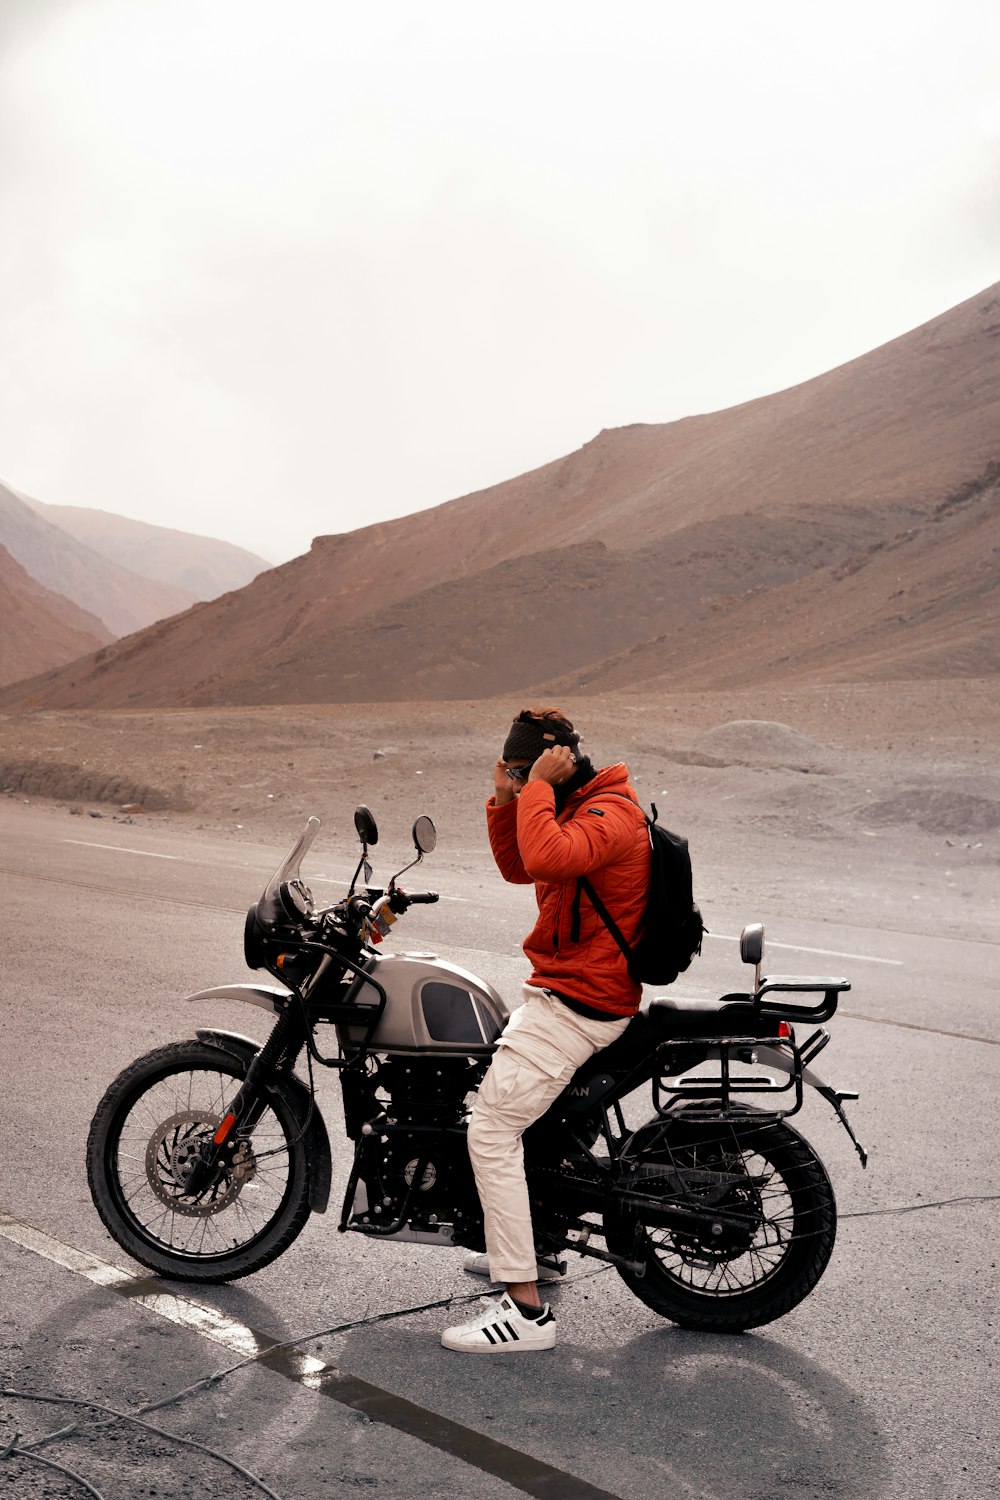 a man standing next to a motorcycle